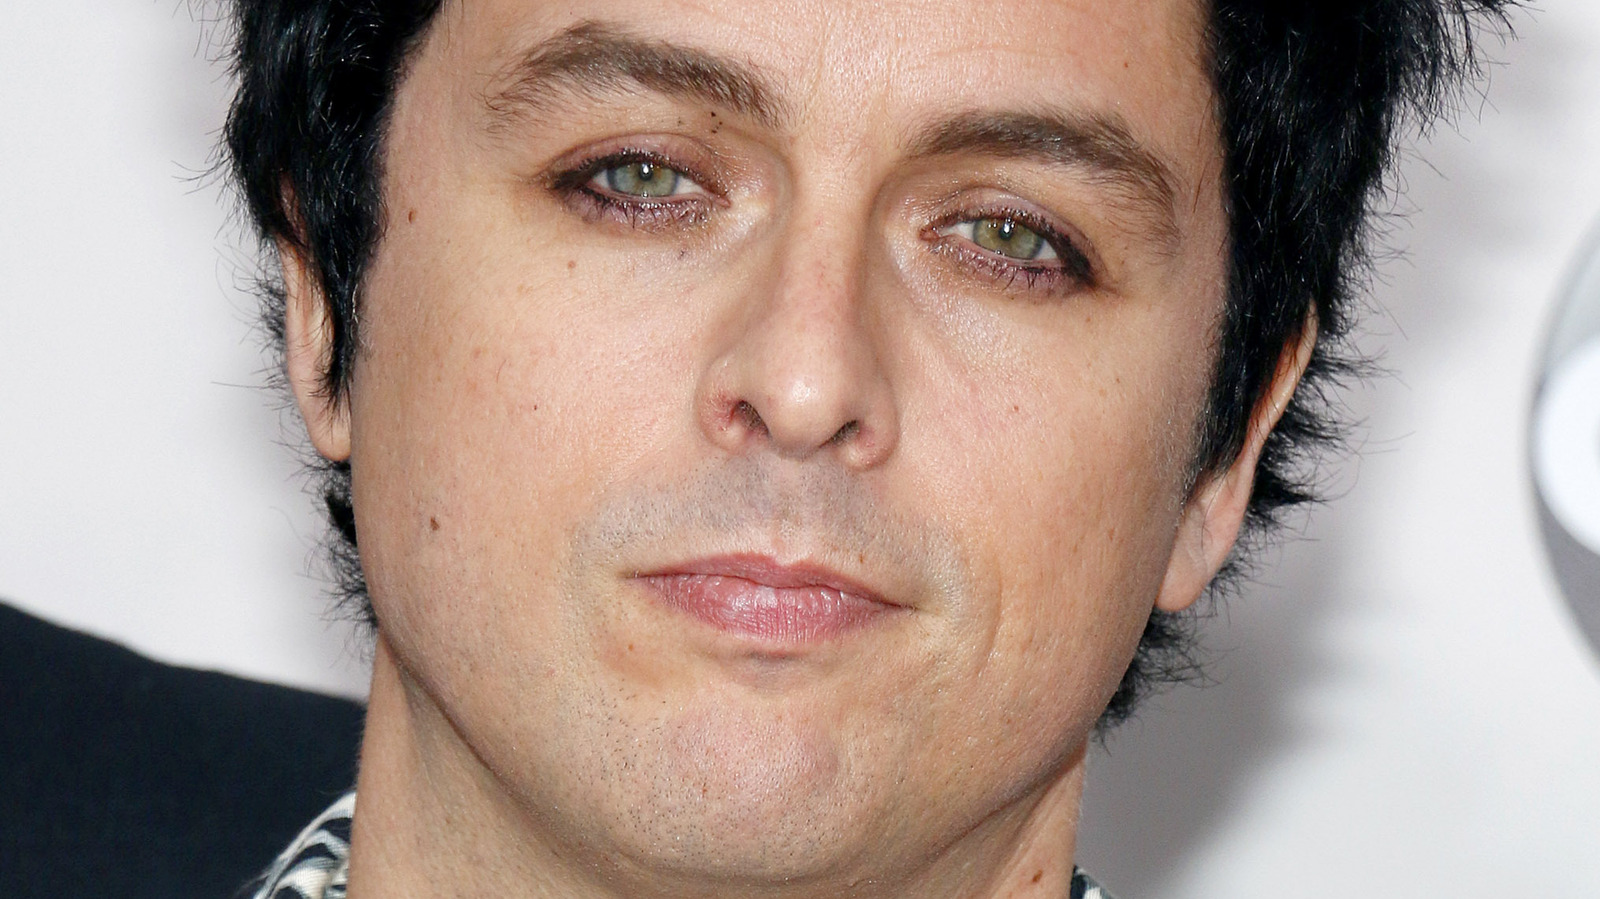 Billie Joe Armstrong Is Taking A Major Stand After The Roe V. Wade Decision